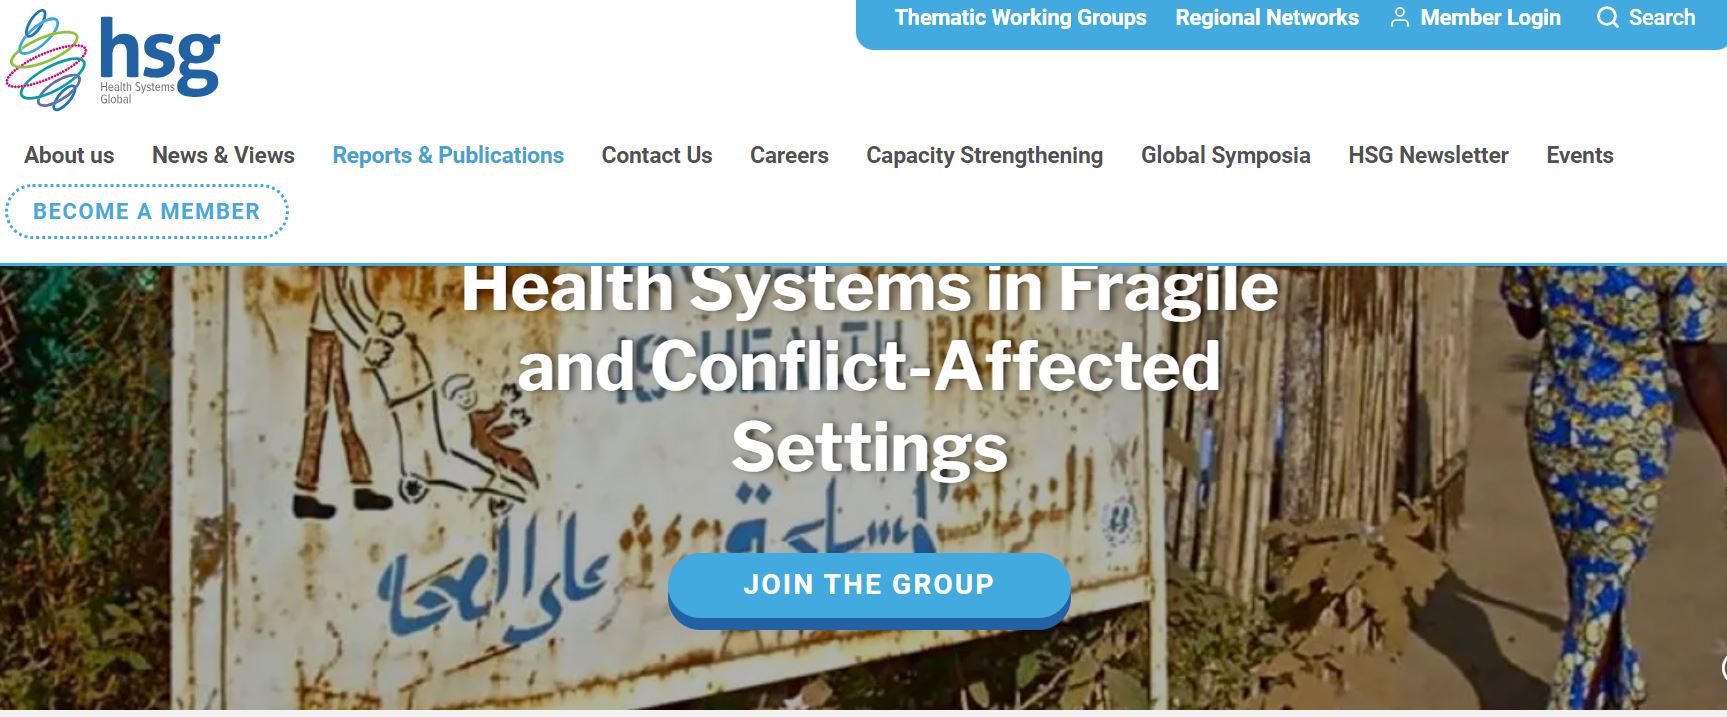 Screengrab of the homepage of the Thematic Working Group on Health Systems in Fragile and Conflict-Affected Settings